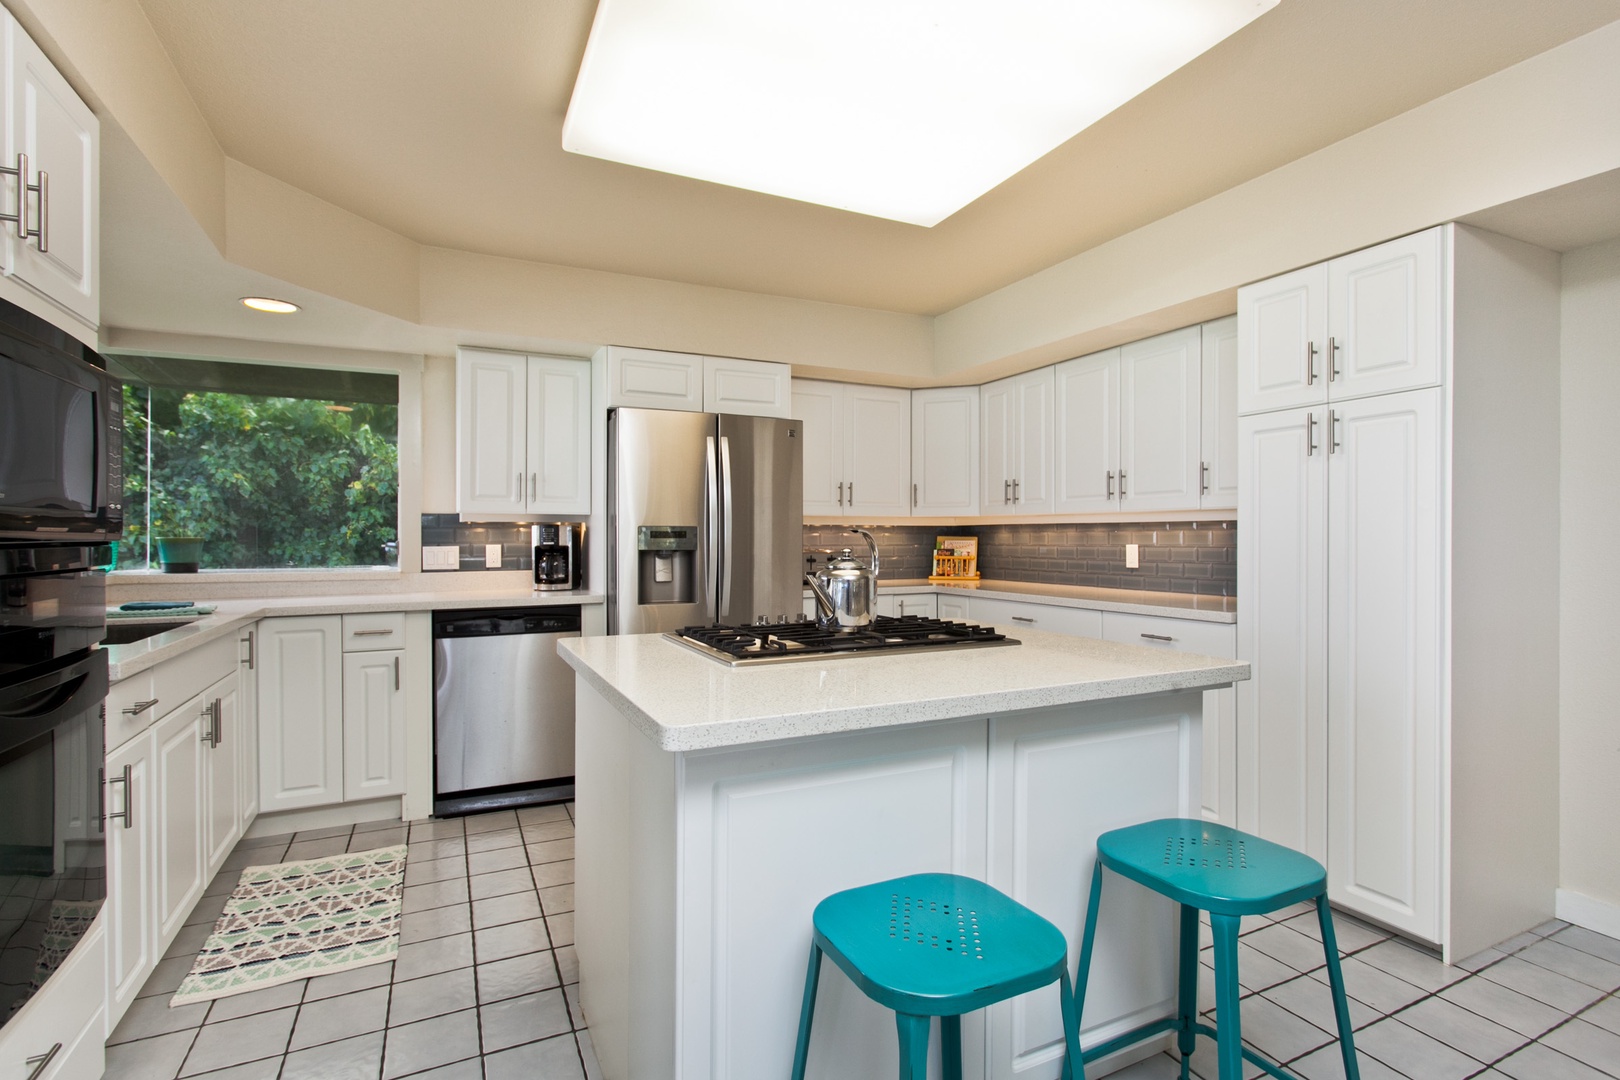 Kailua Vacation Rentals, Hale Kolea* - Fully-stocked kitchen with top of the line appliances.